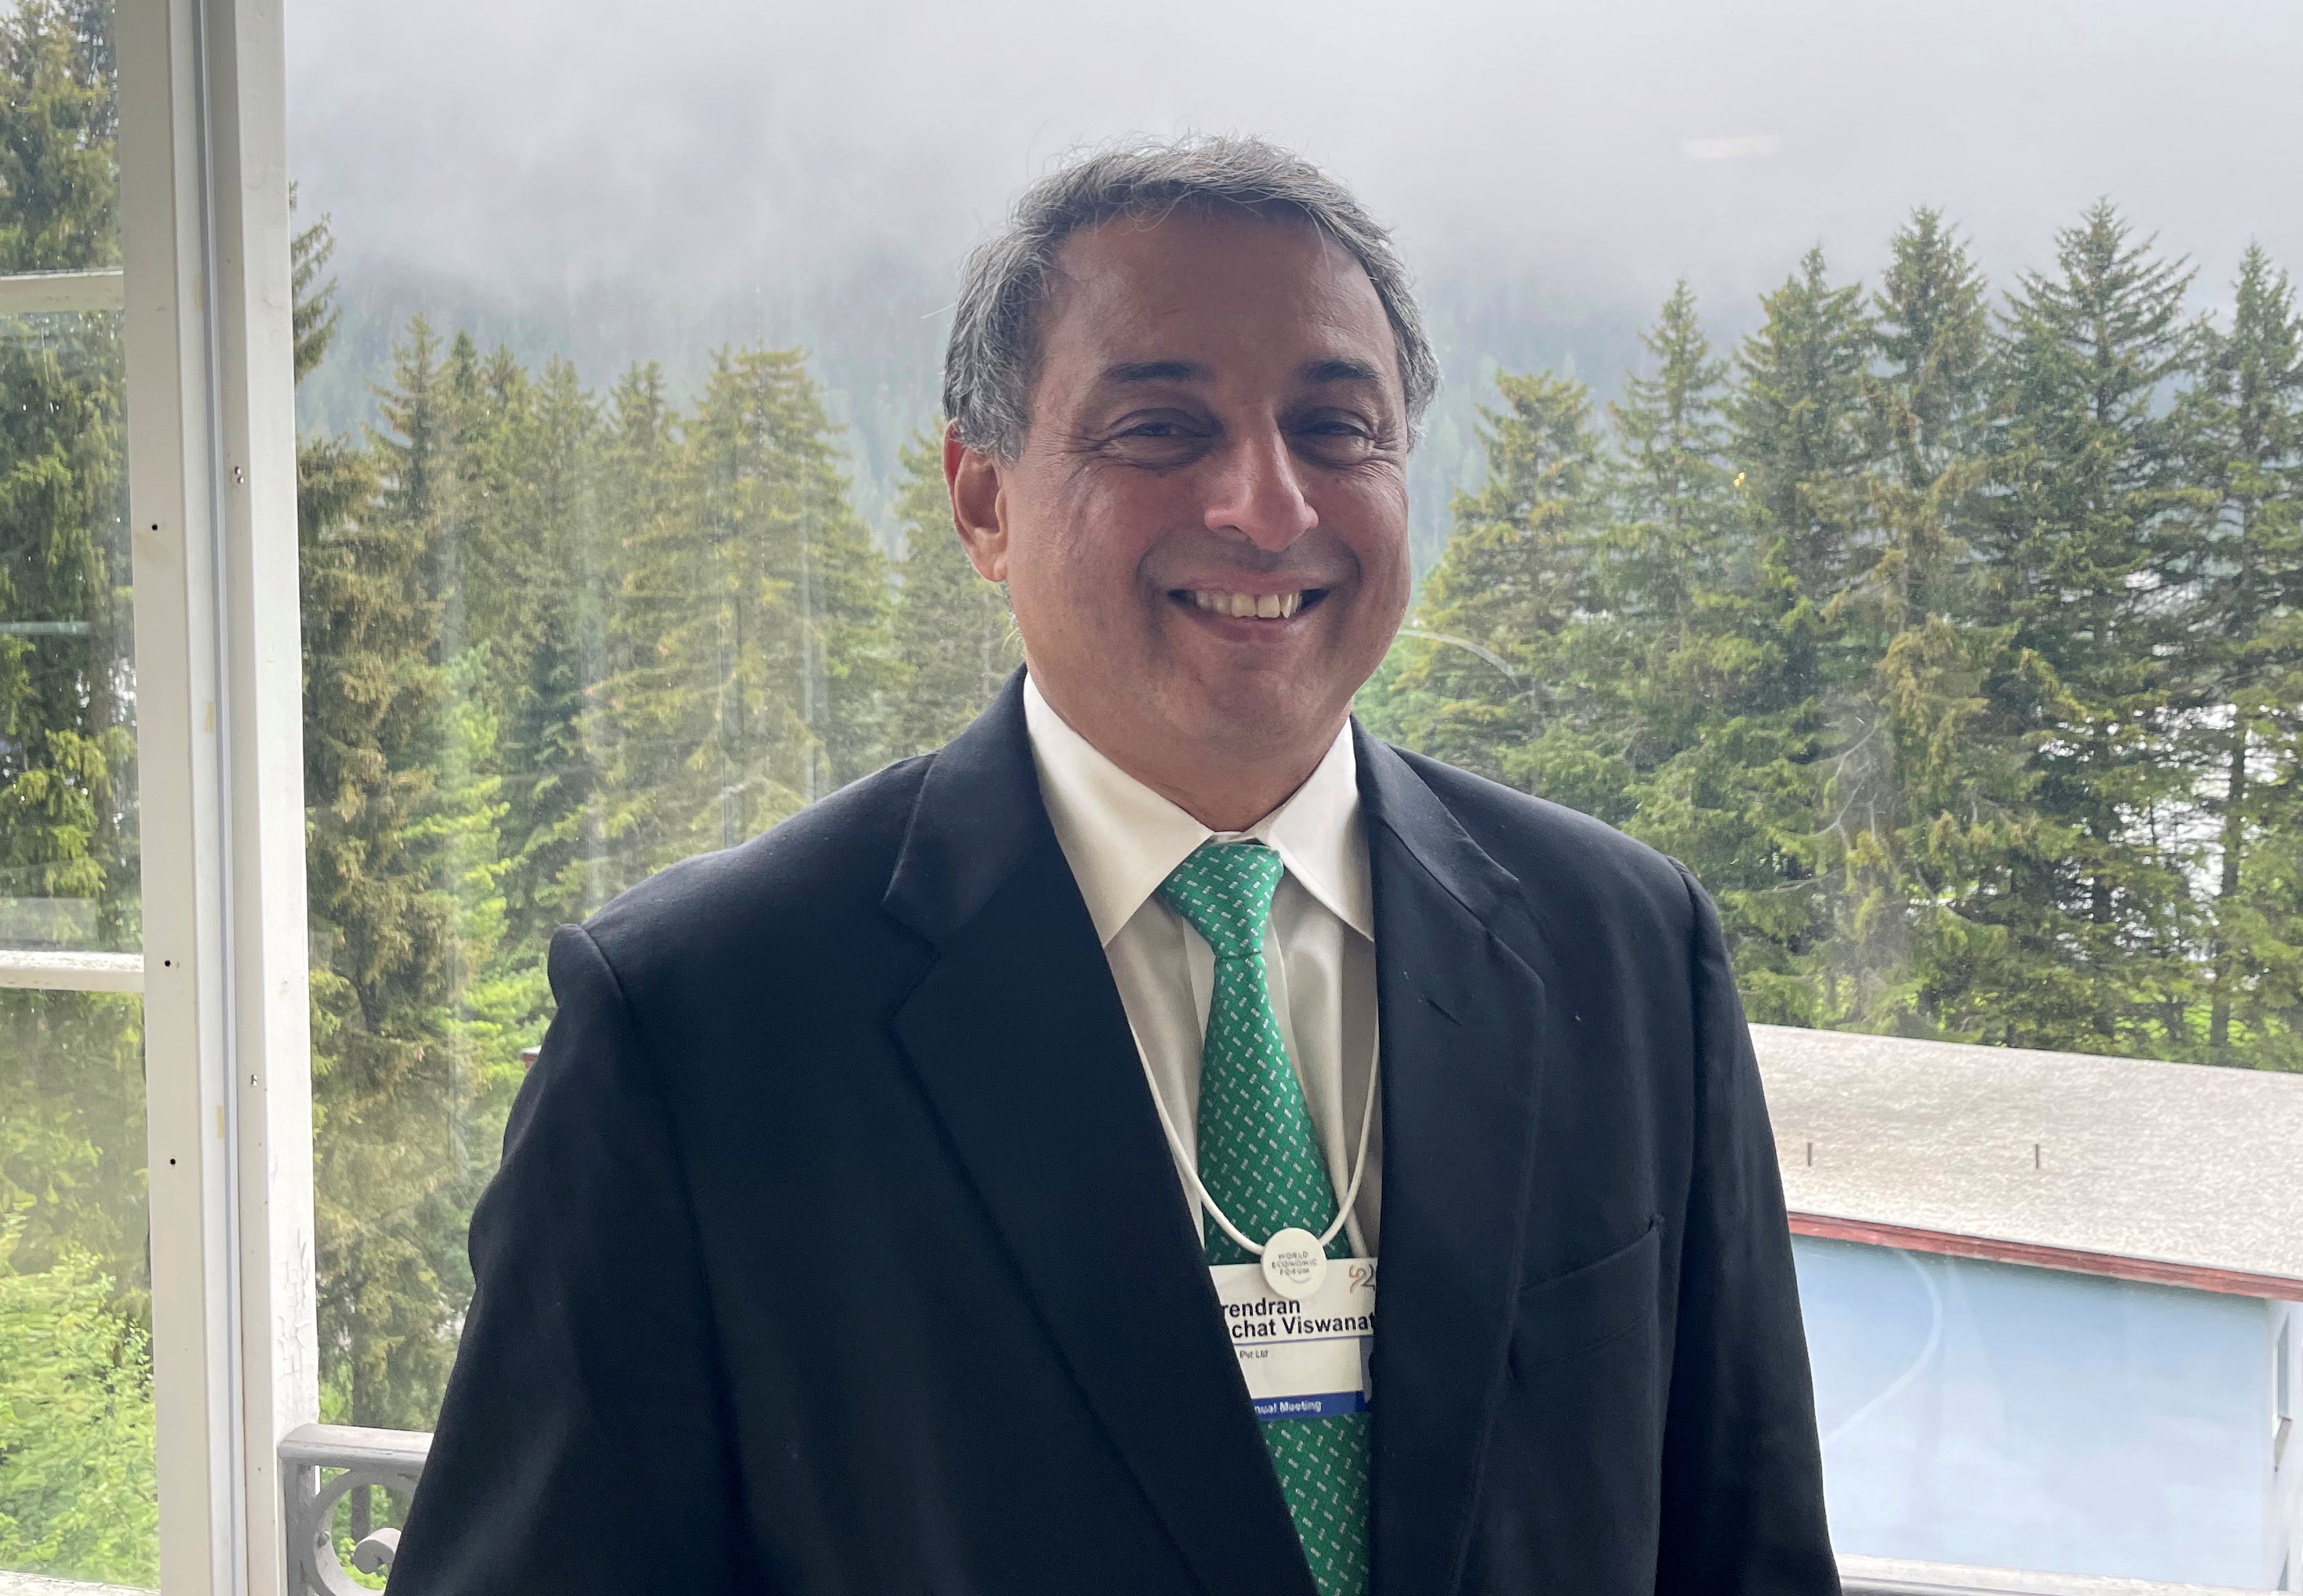 Narendran of Tata Steel TISC.NS poses for a picture after an interview in Davos